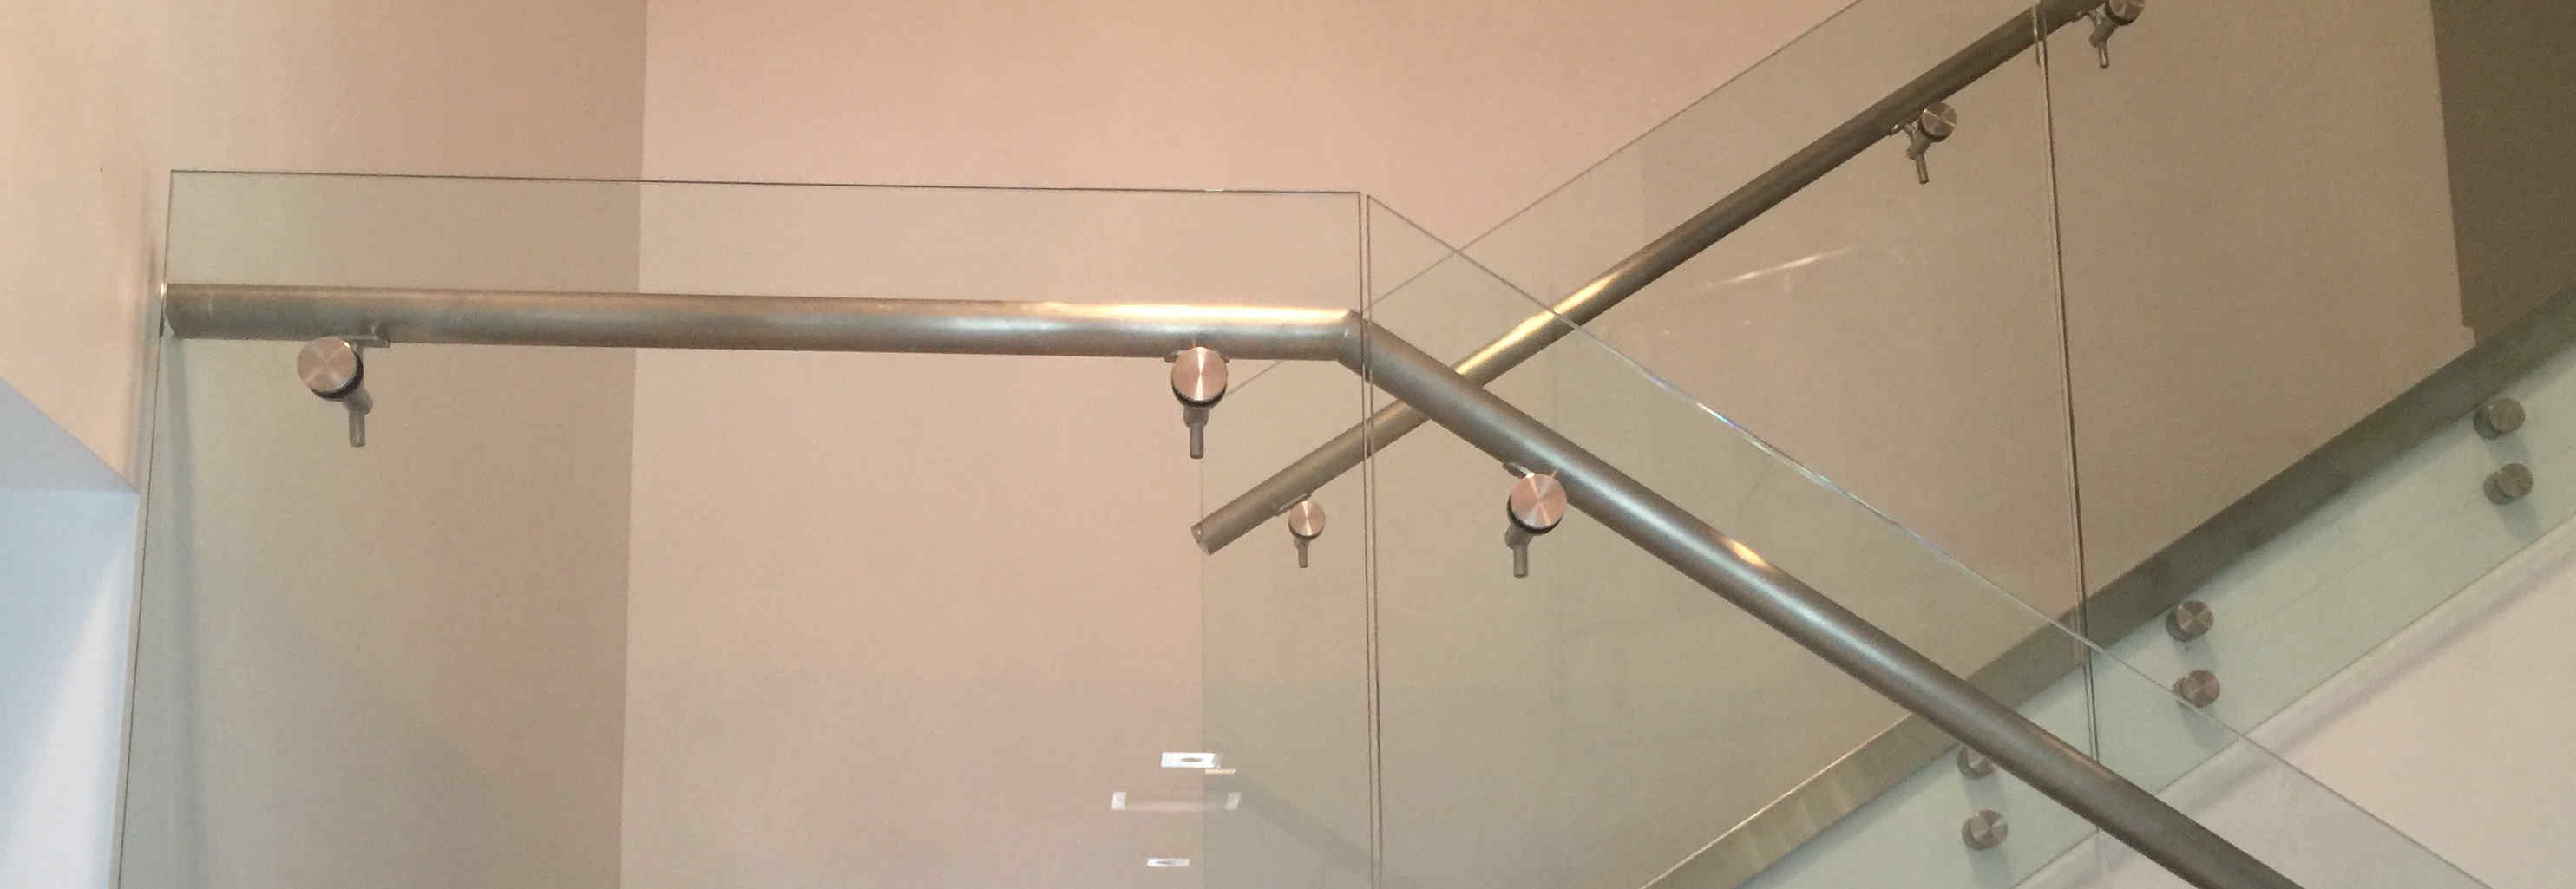 Structural Glass Railing Installation